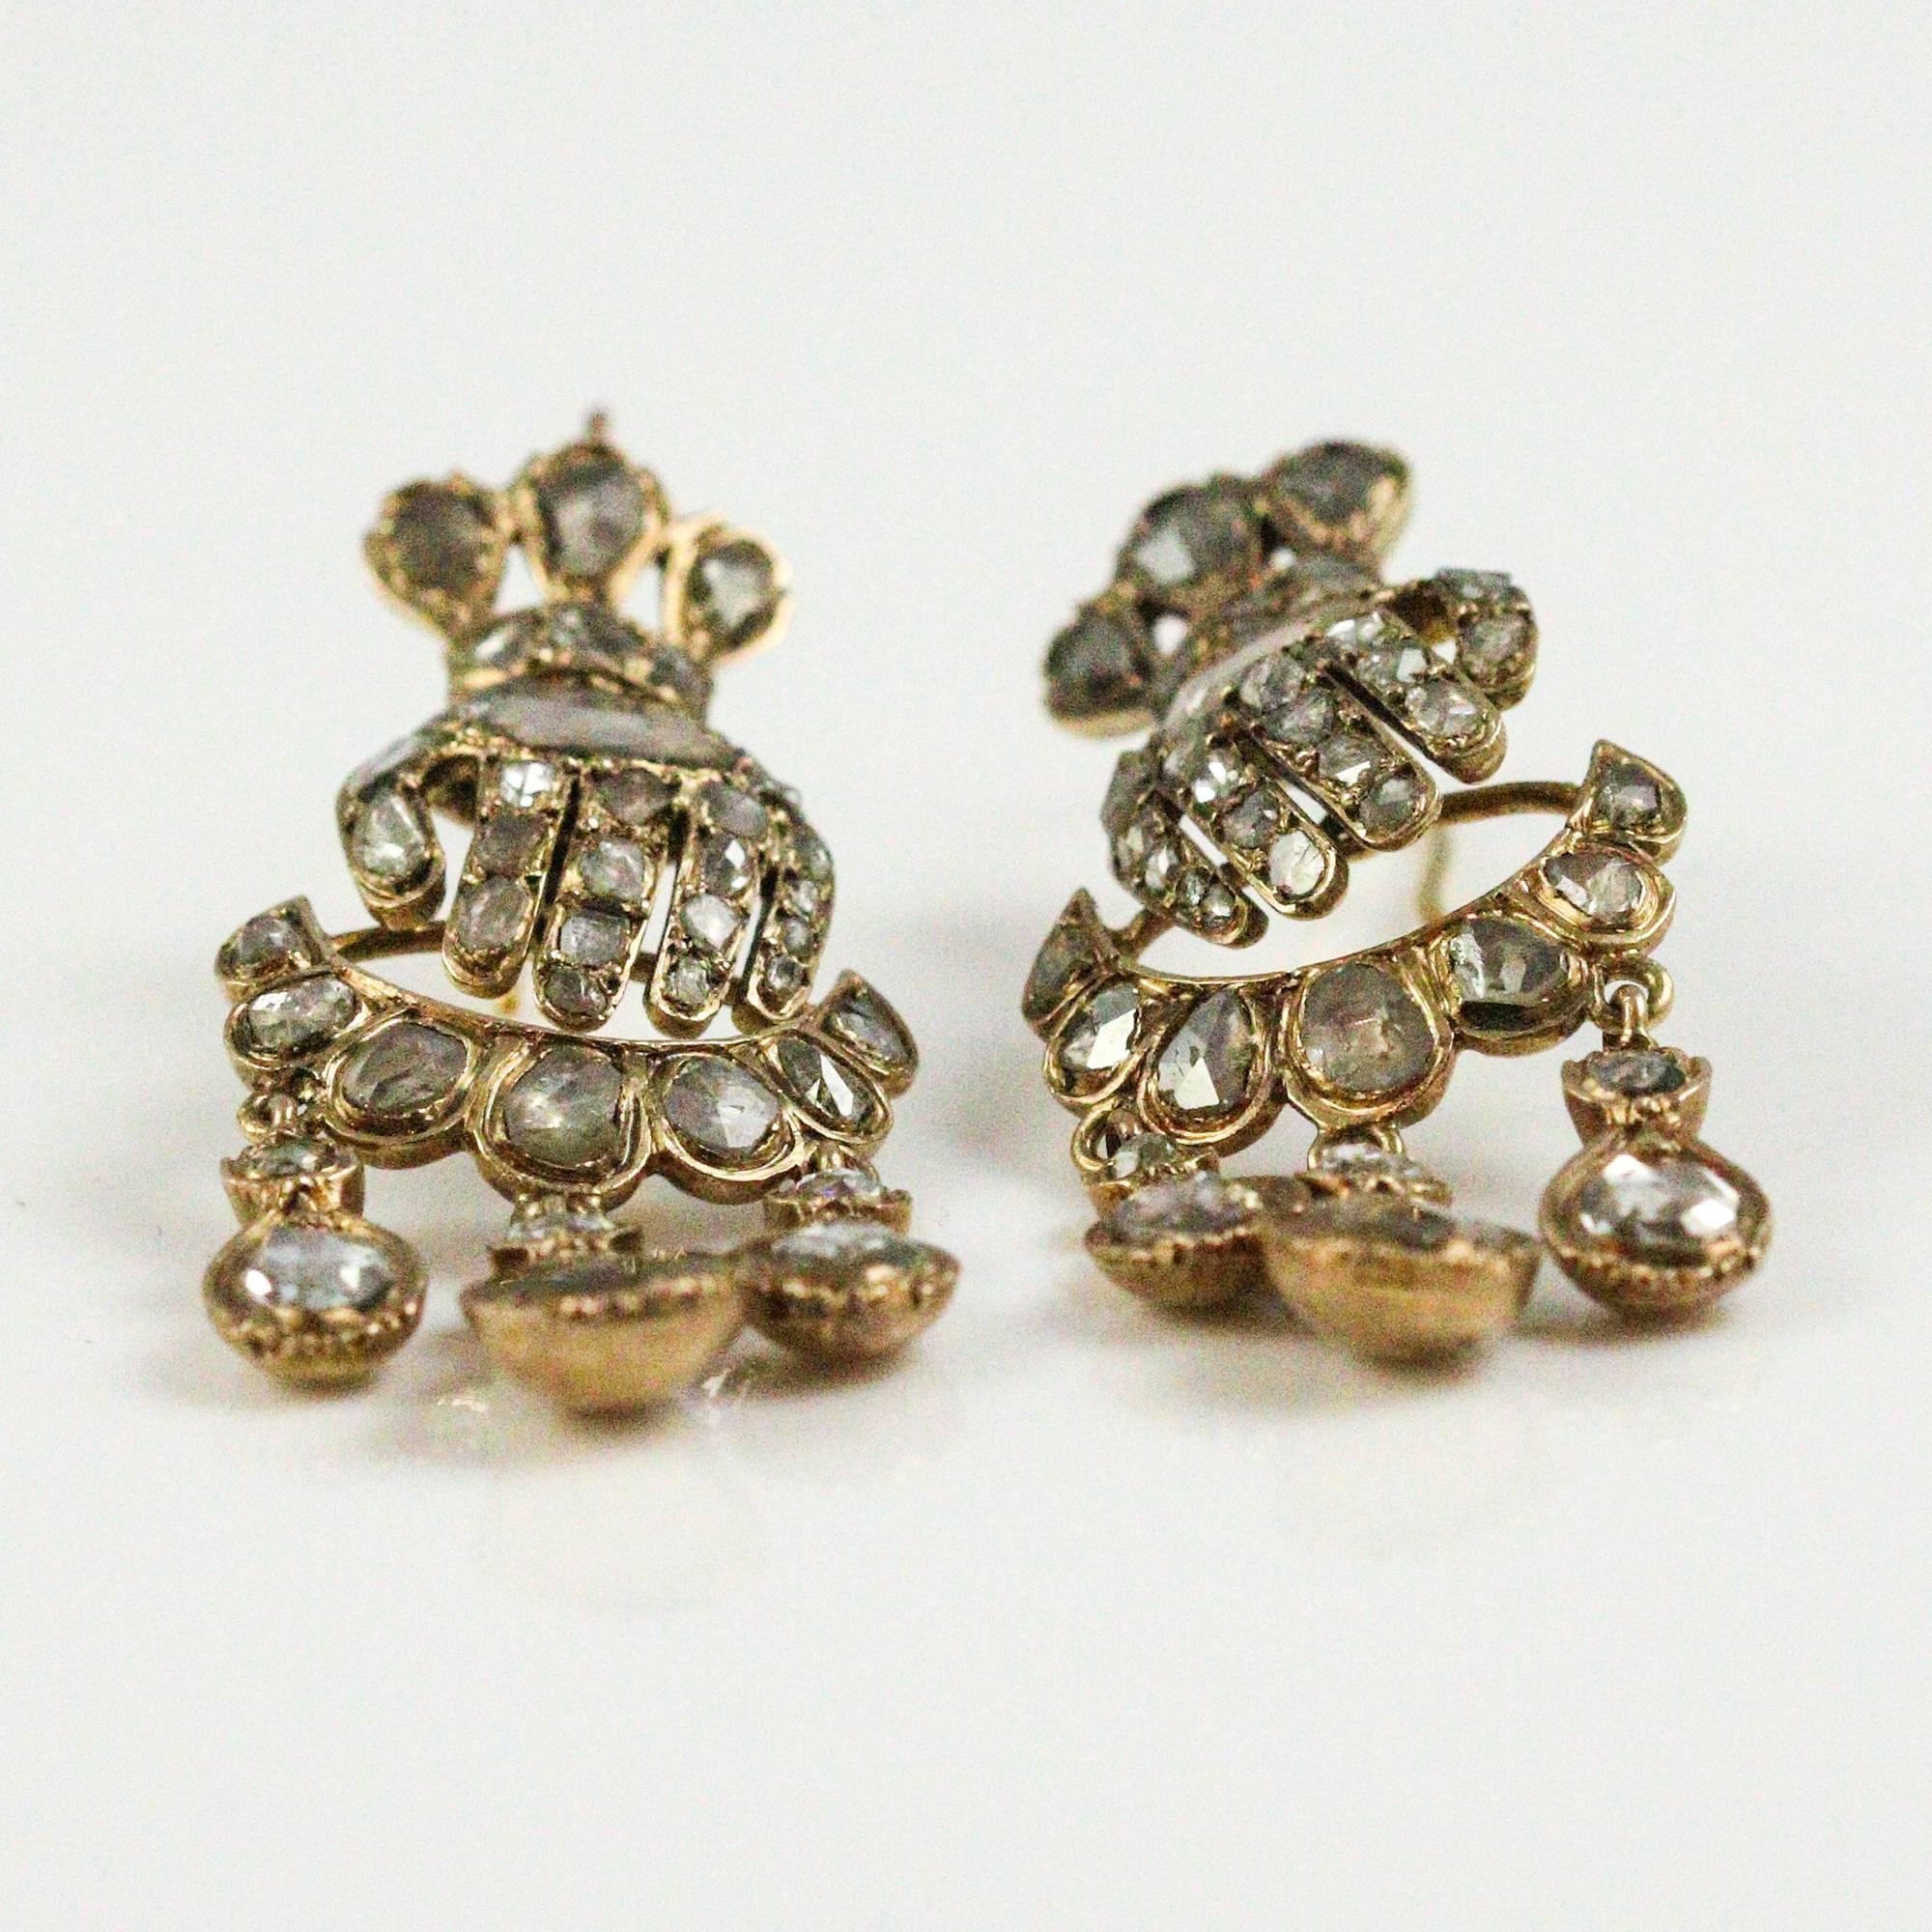 These magnificient en tremblant earrings are hand crafted in 18k yellow gold with very primitive old rose cut diamonds and a joint in the back to ensure the bottoms of the earrings move freely to provide more sparkle from the stones. The design is